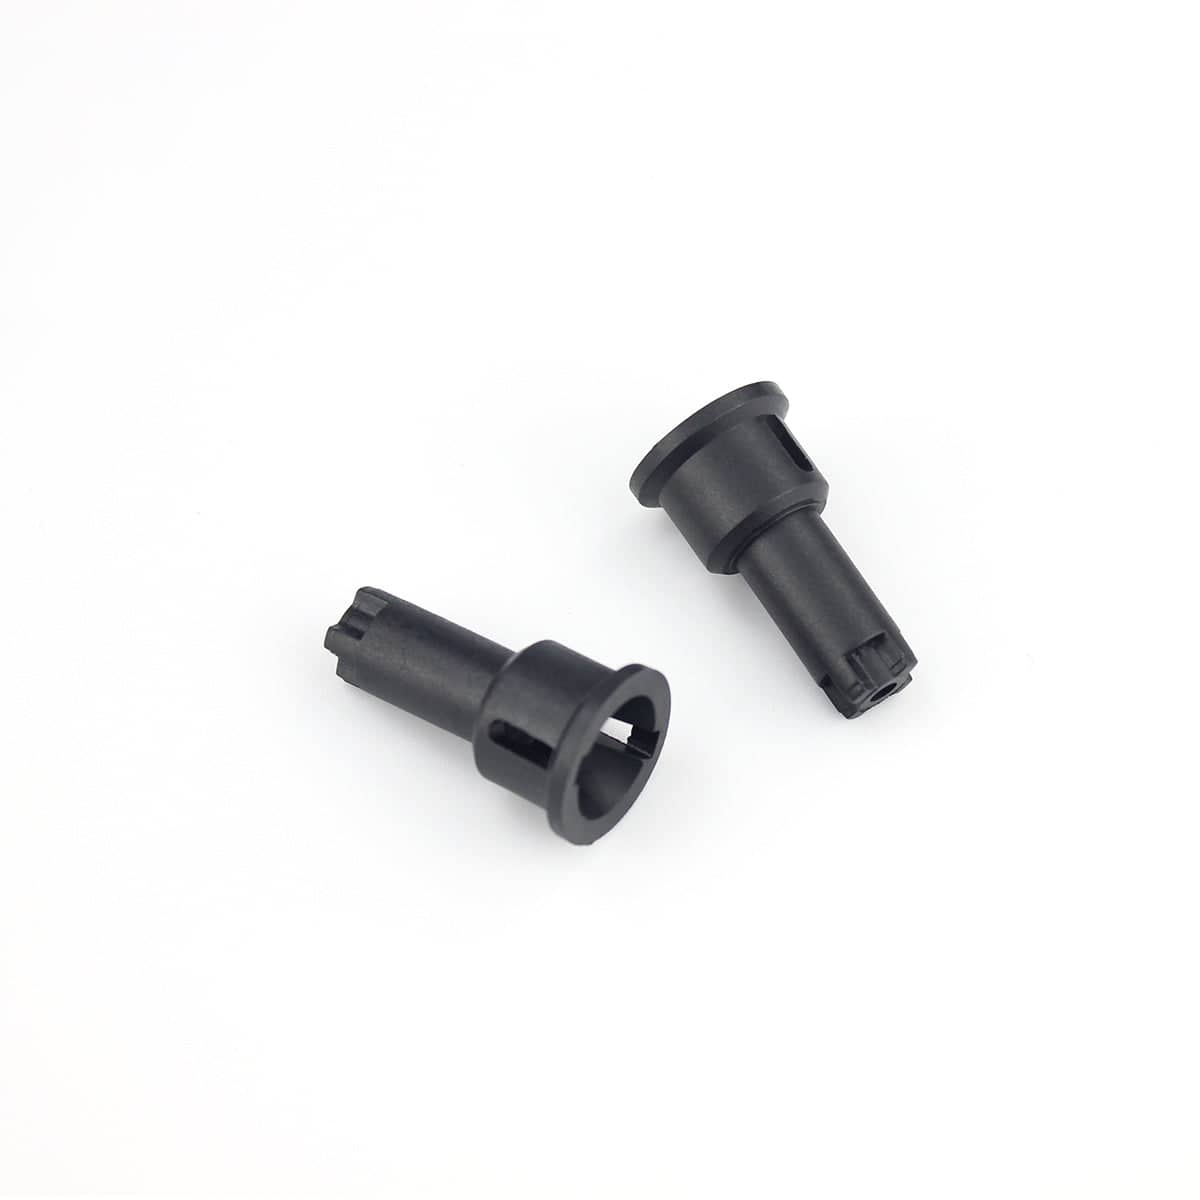 Hosim RC Car Rear Left&Right Drive Shaft Section Cup Parts 71-039 for G171 G172 G173 G174